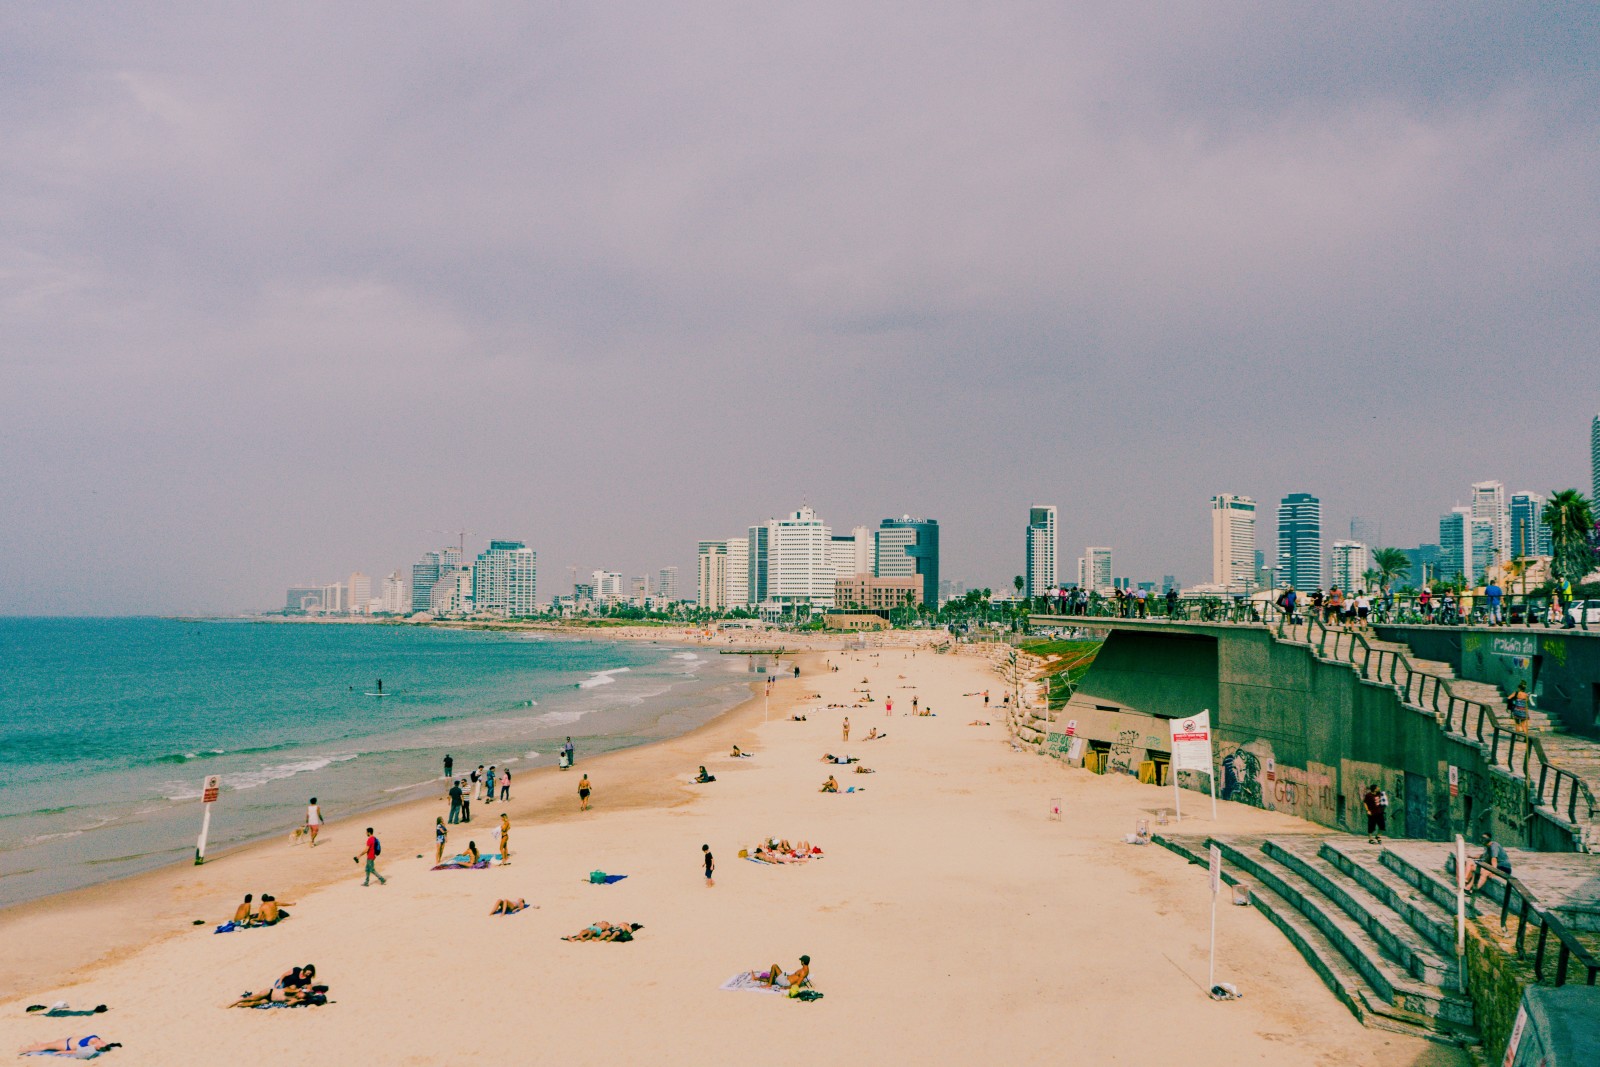 Beach with water with city in the background on a cloudy day